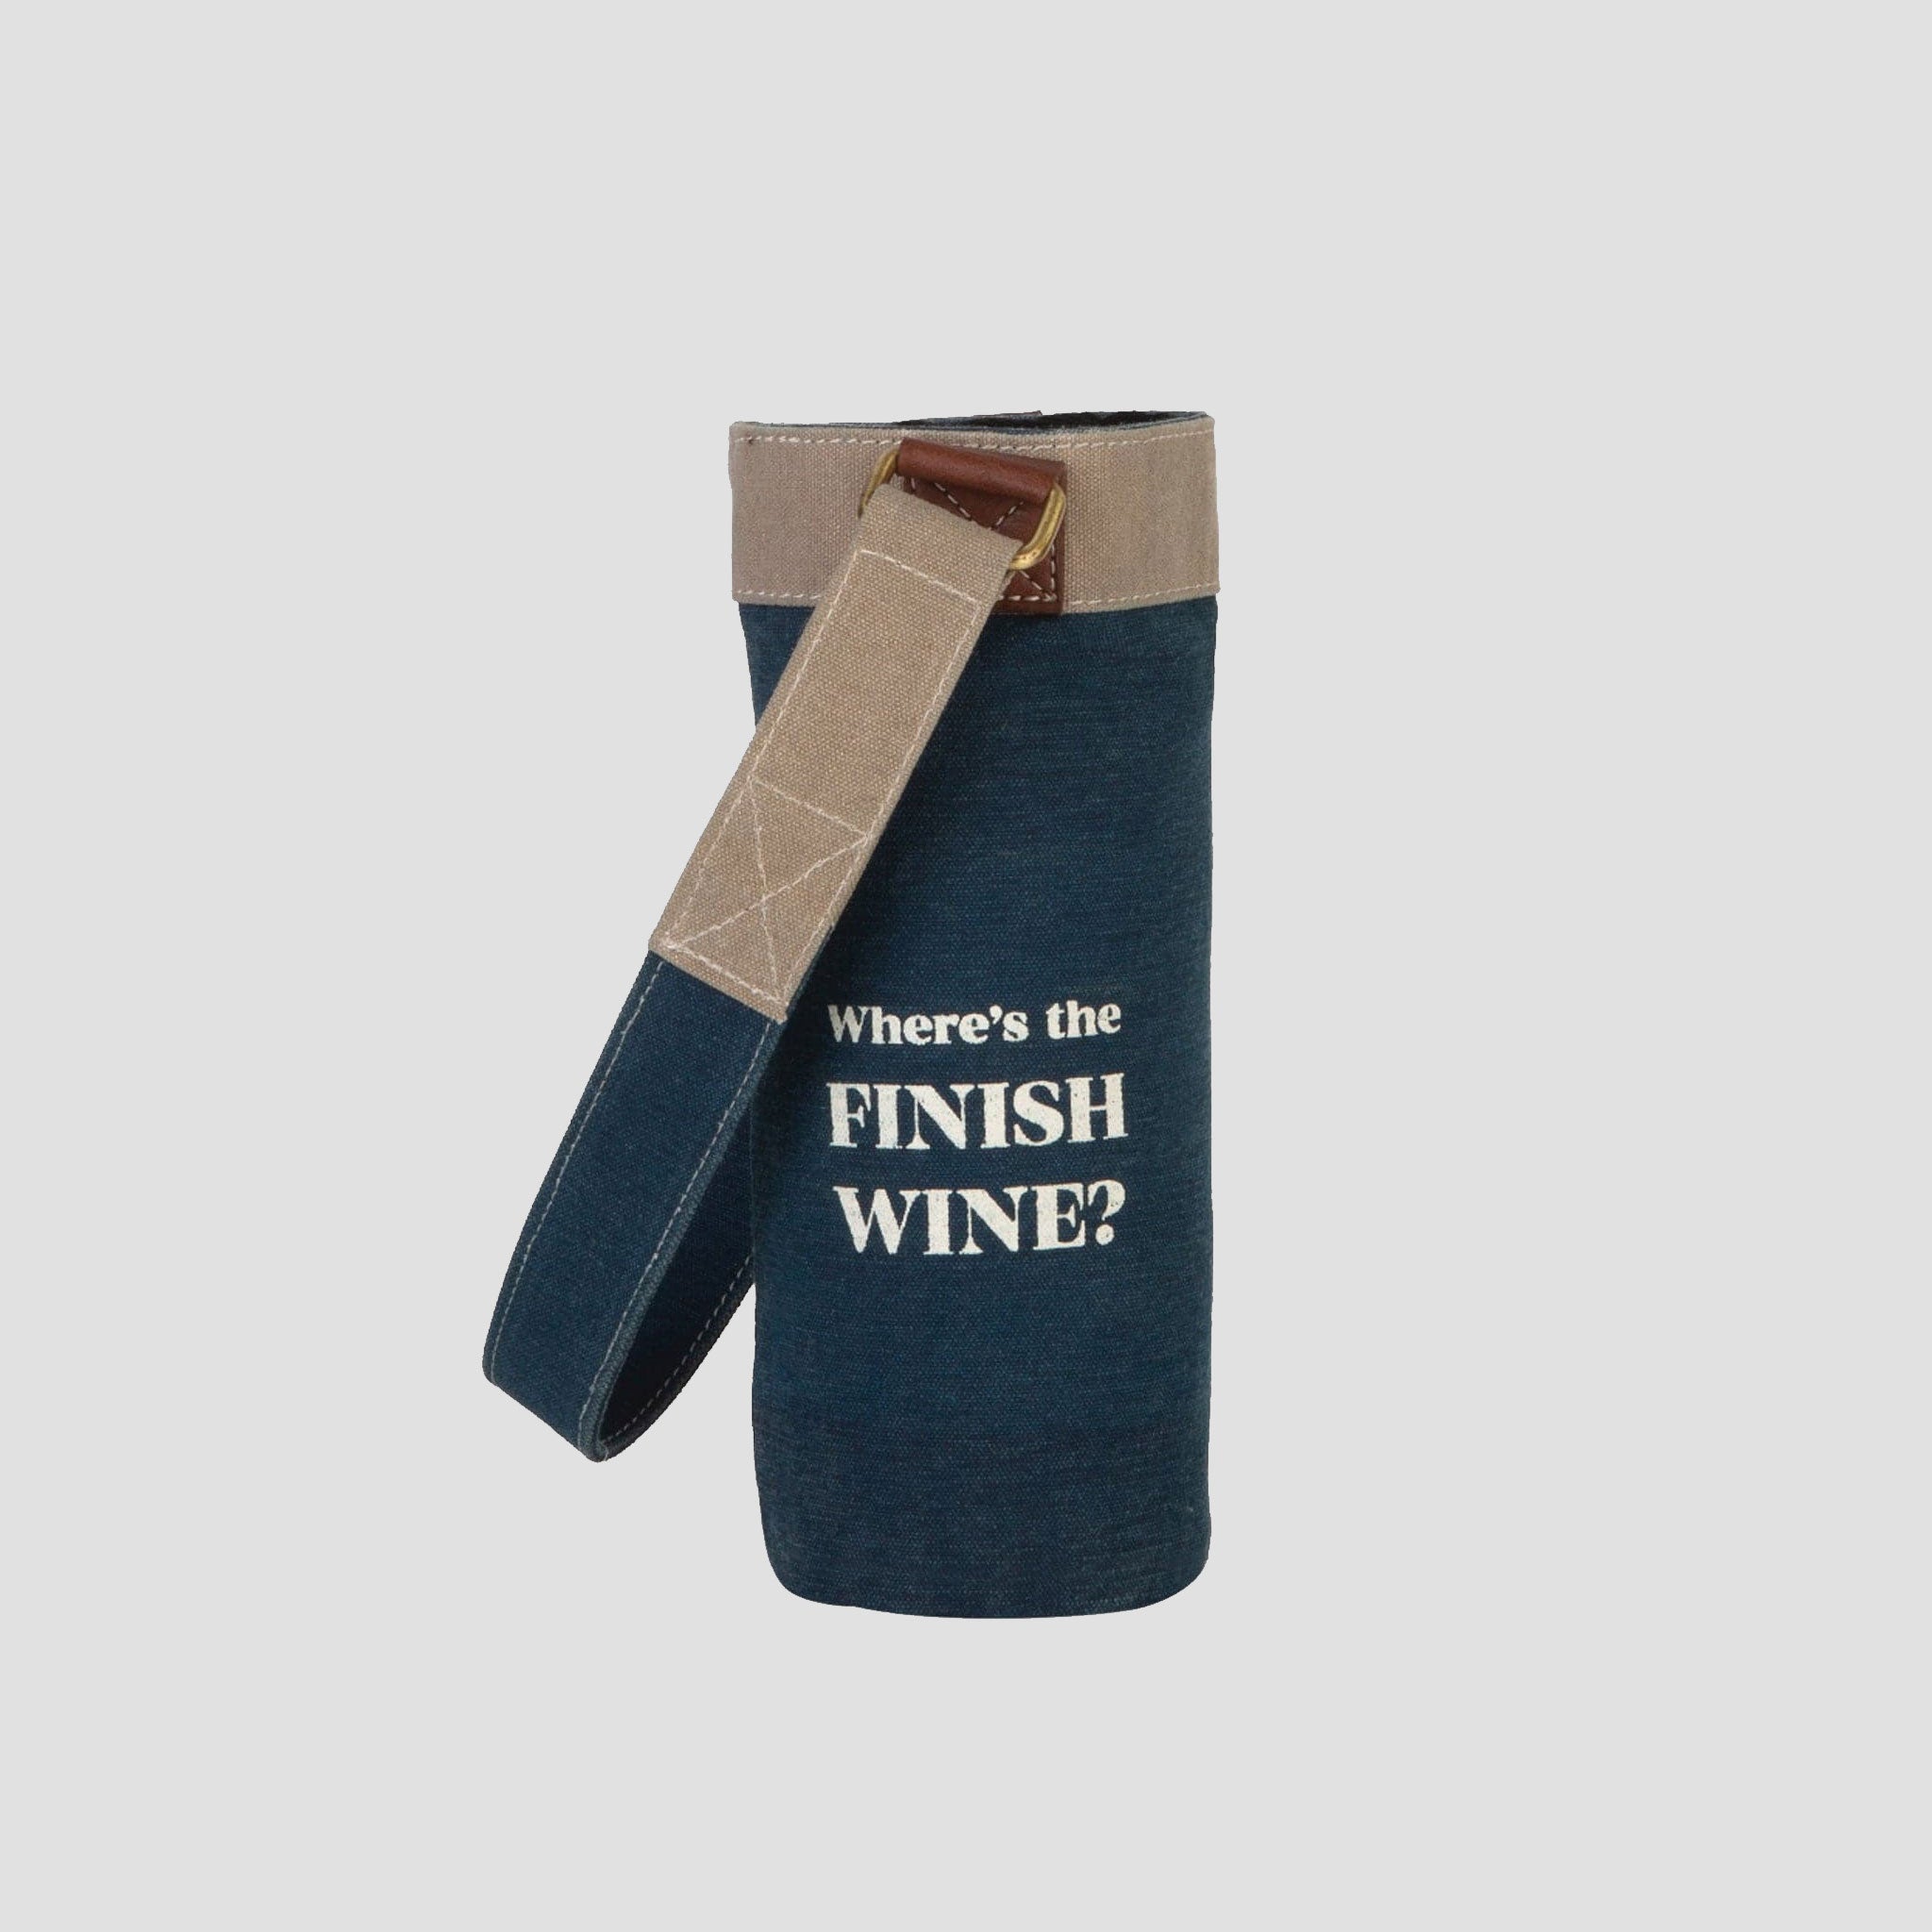 Mona B 100% Canvas Wine Bags Perfect to give as a Gift or for Yourself as You New go-to Wine Bag (Finish Wine)